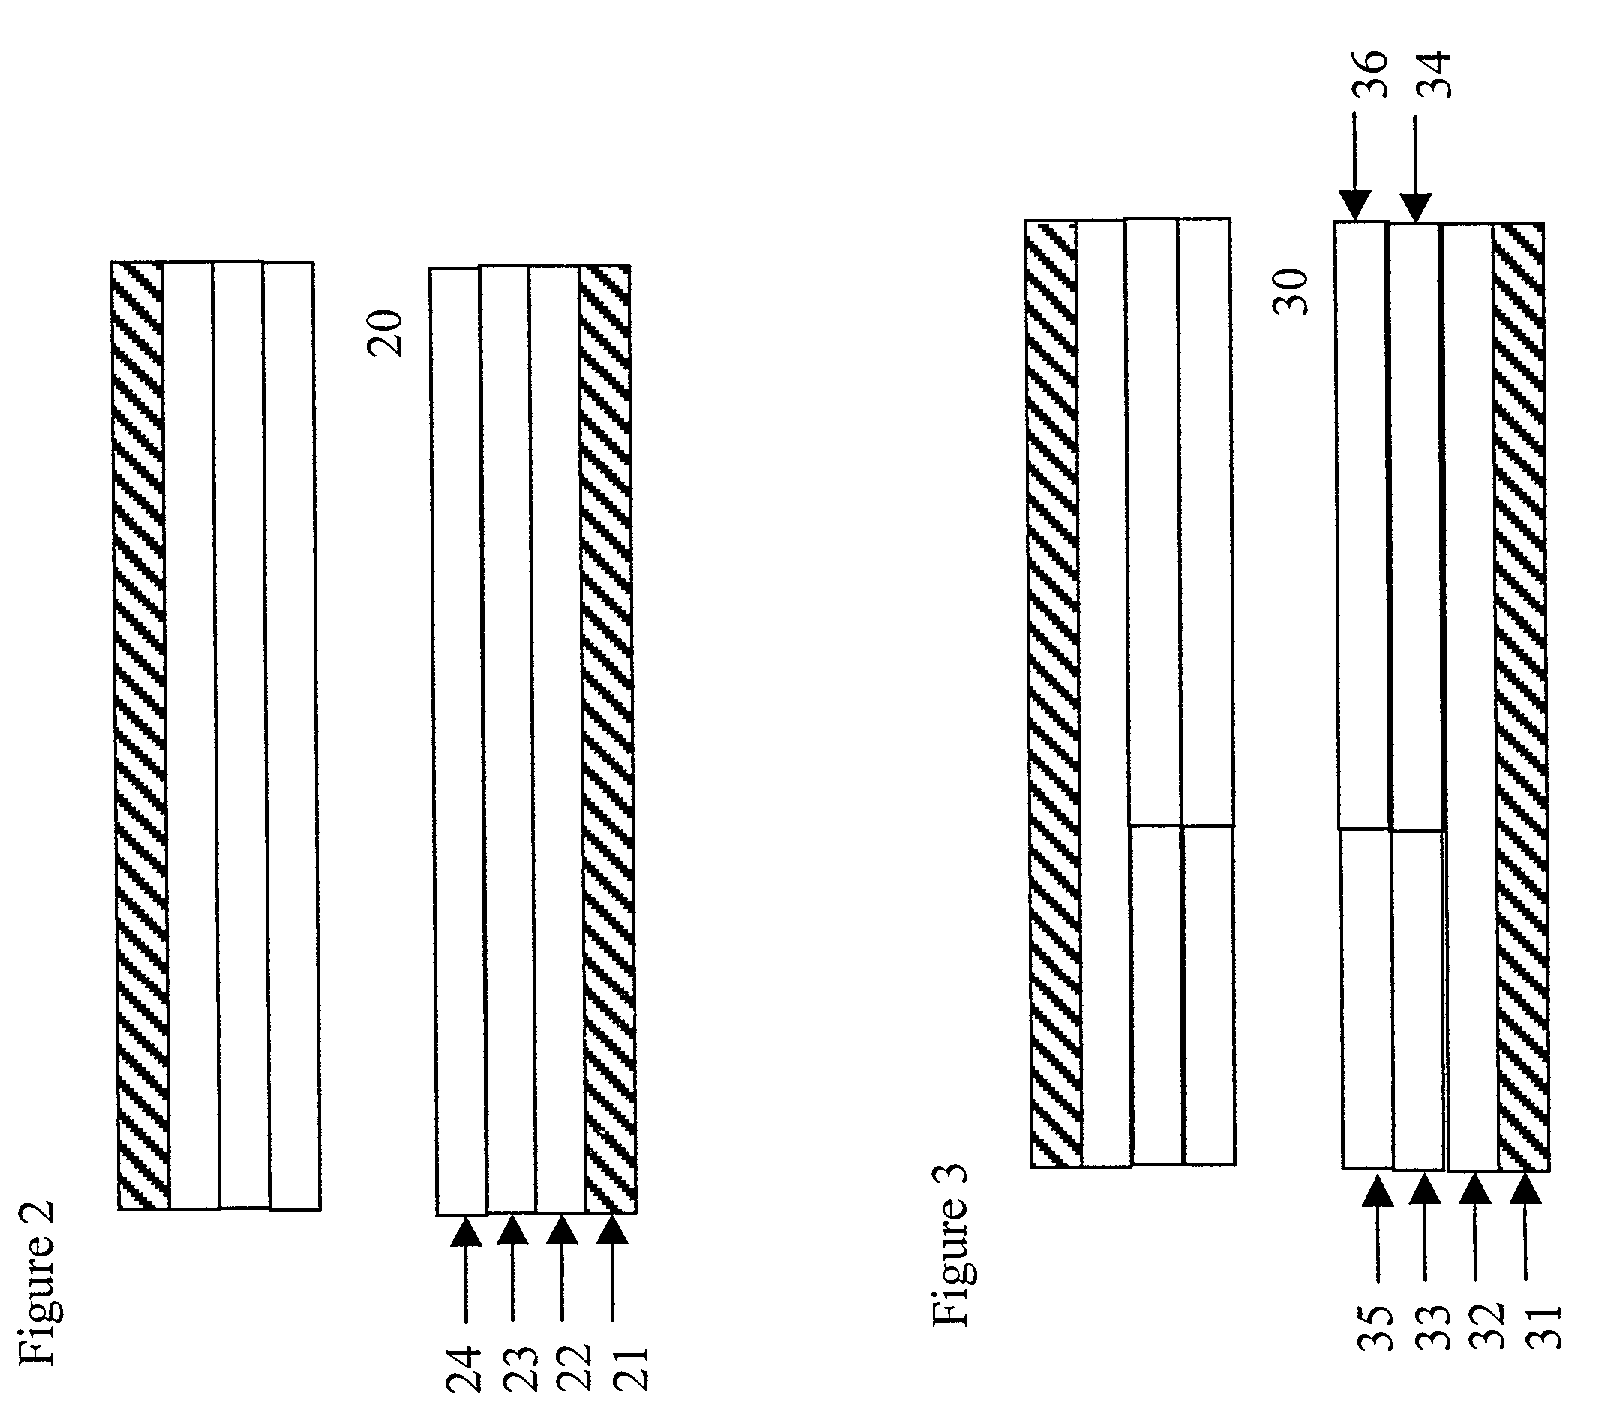 Exhaust articles for internal combustion engines